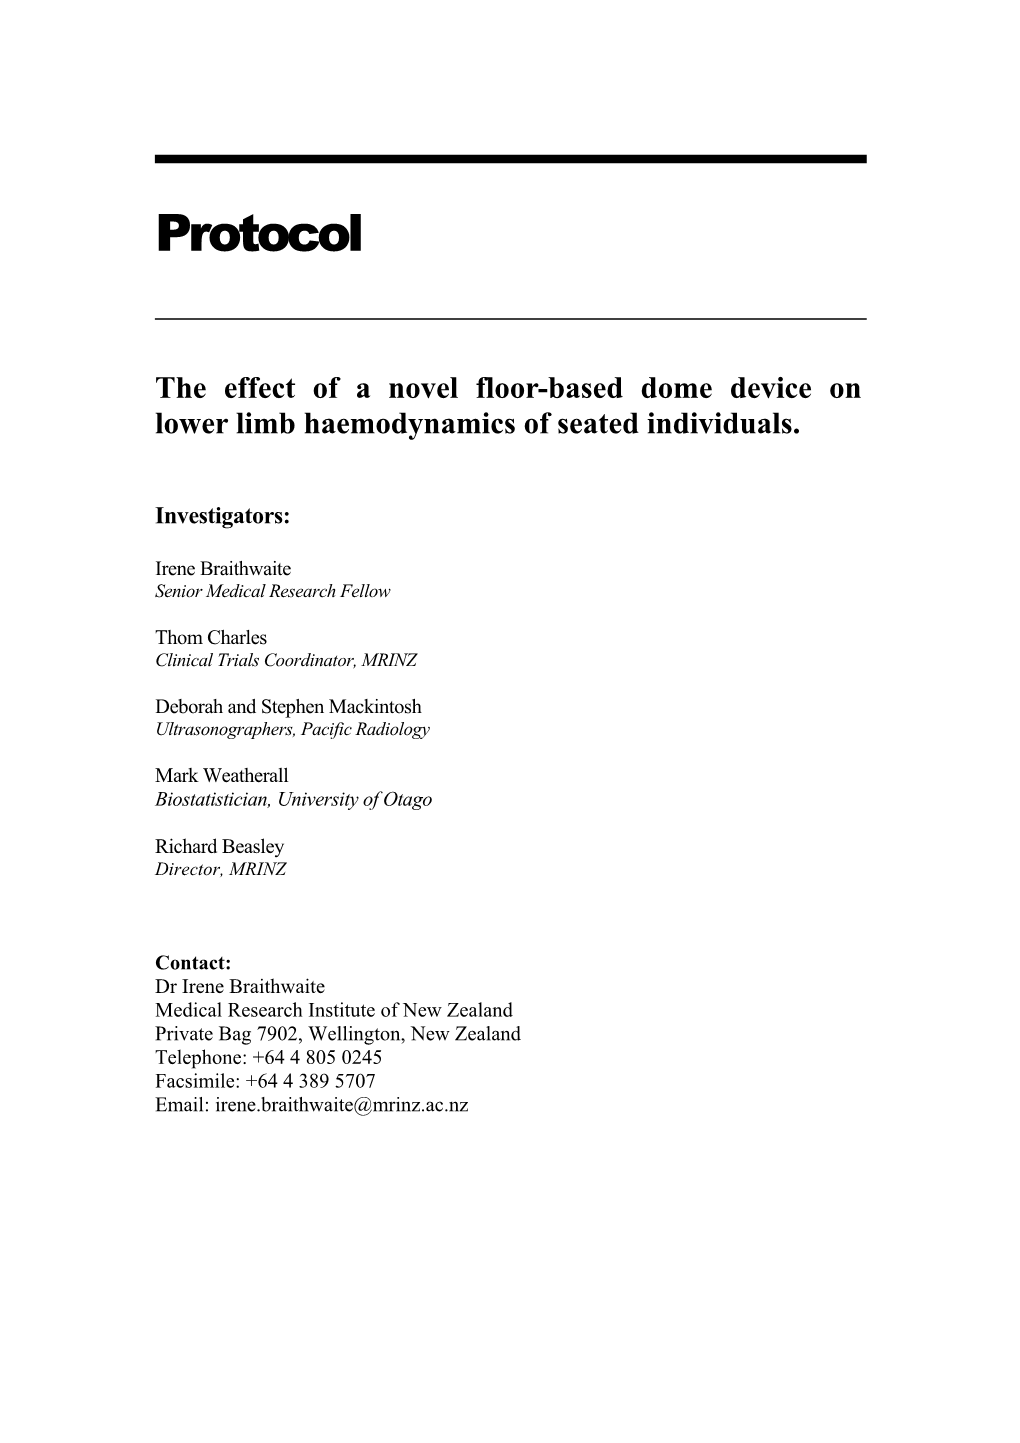 The Effect of a Novel Floor-Based Dome Device on Lower Limb Haemodynamics of Seated